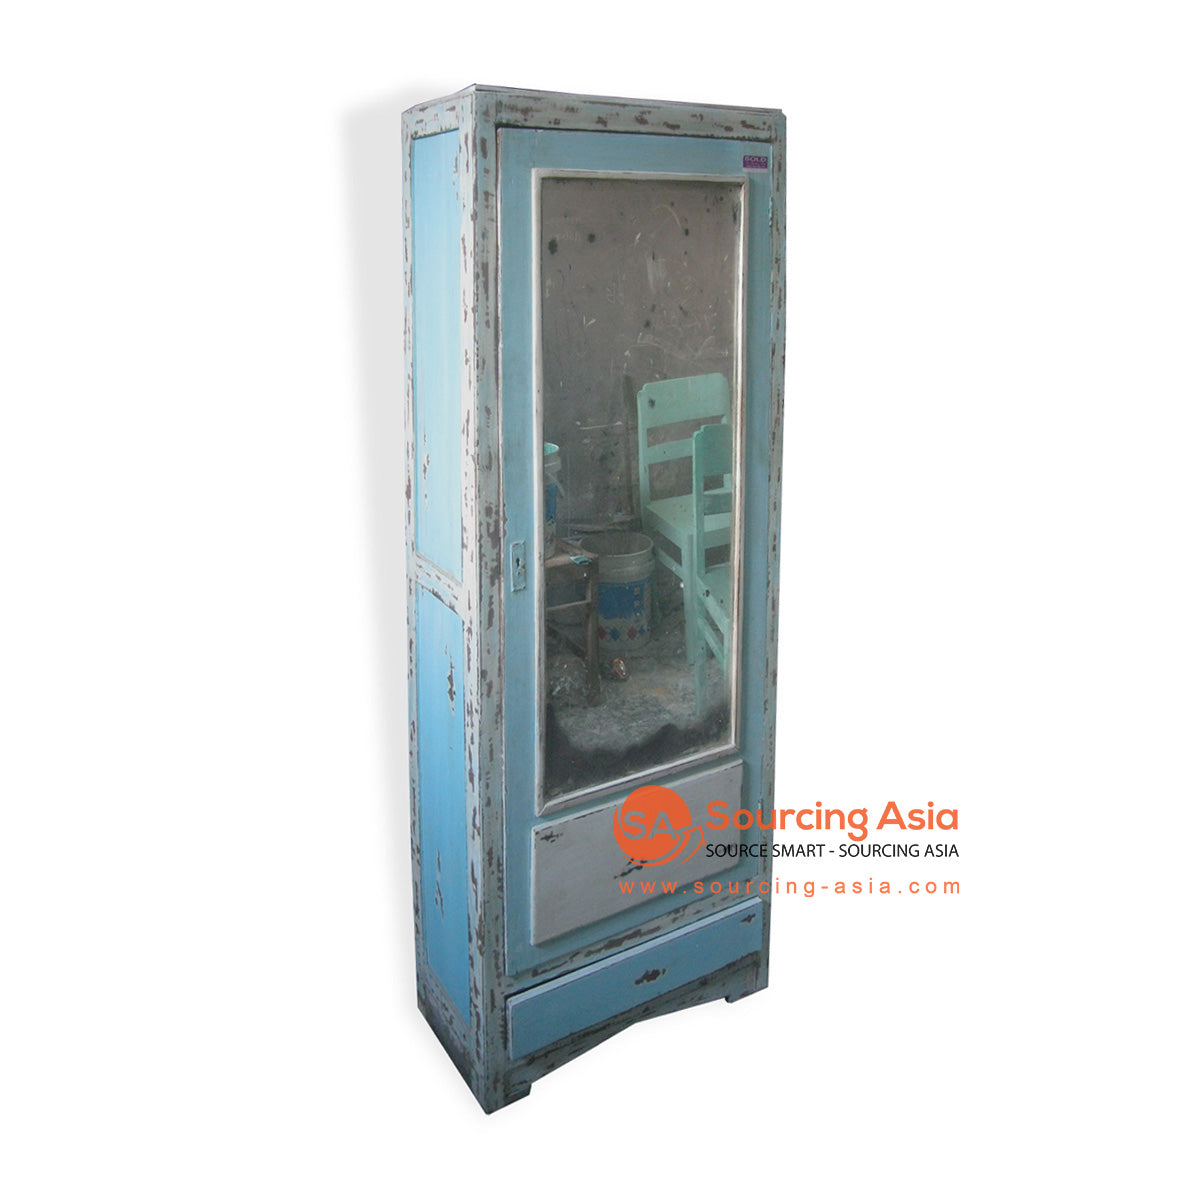 SIX022 ANTIQUE TURQUOISE RECYCLED TEAK WOOD OLD STYLE GLASS DOOR CABINET